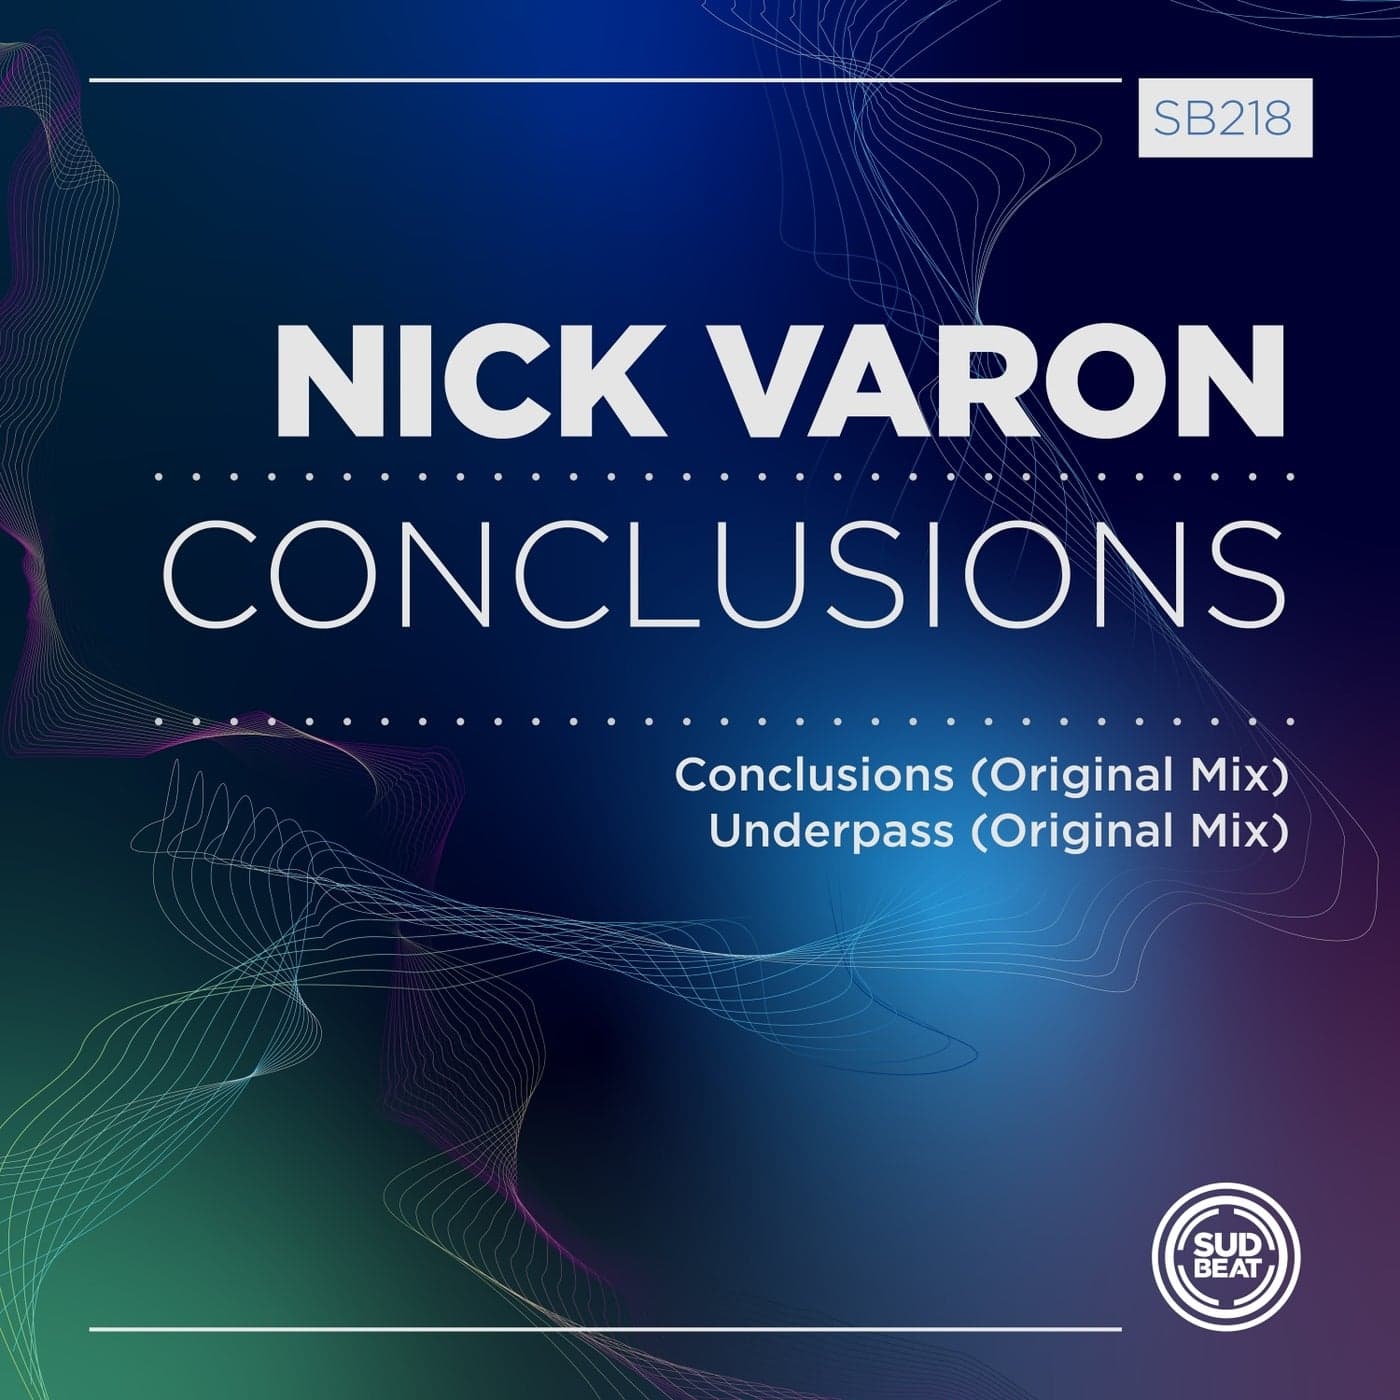 Download Nick Varon - Conclusions on Electrobuzz